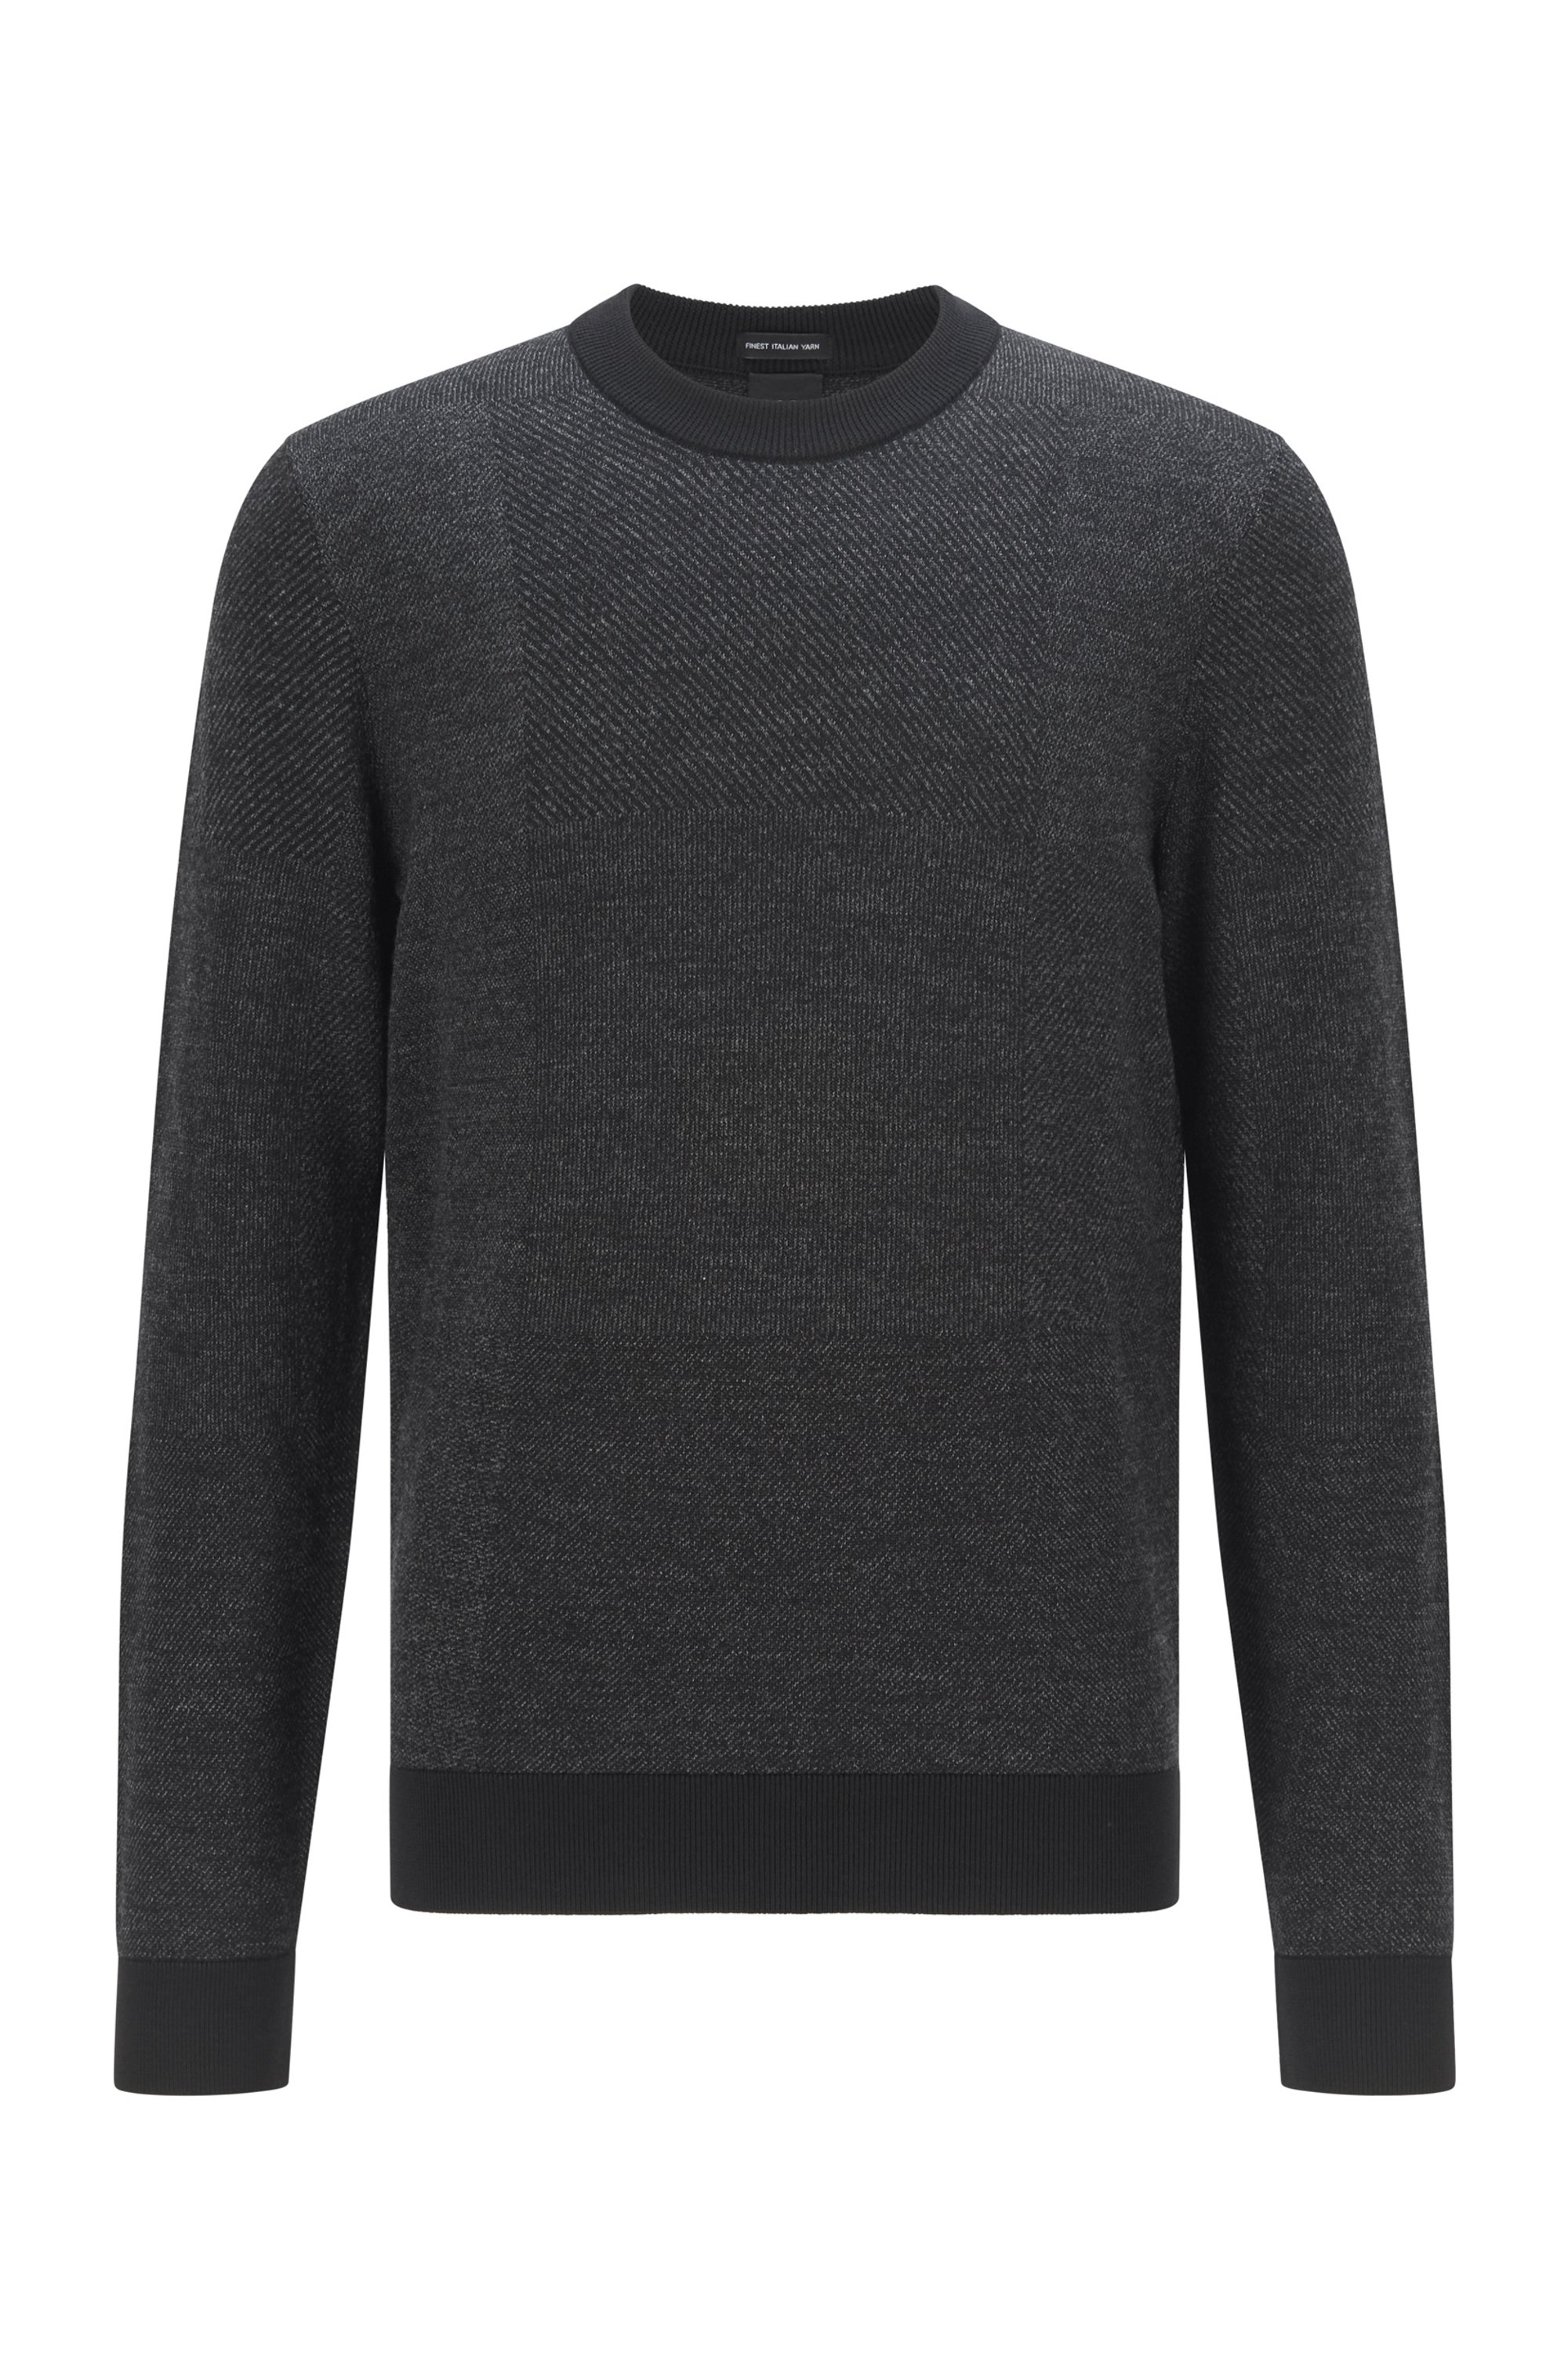 Crew-neck sweater in Italian wool with patchwork effect, Black